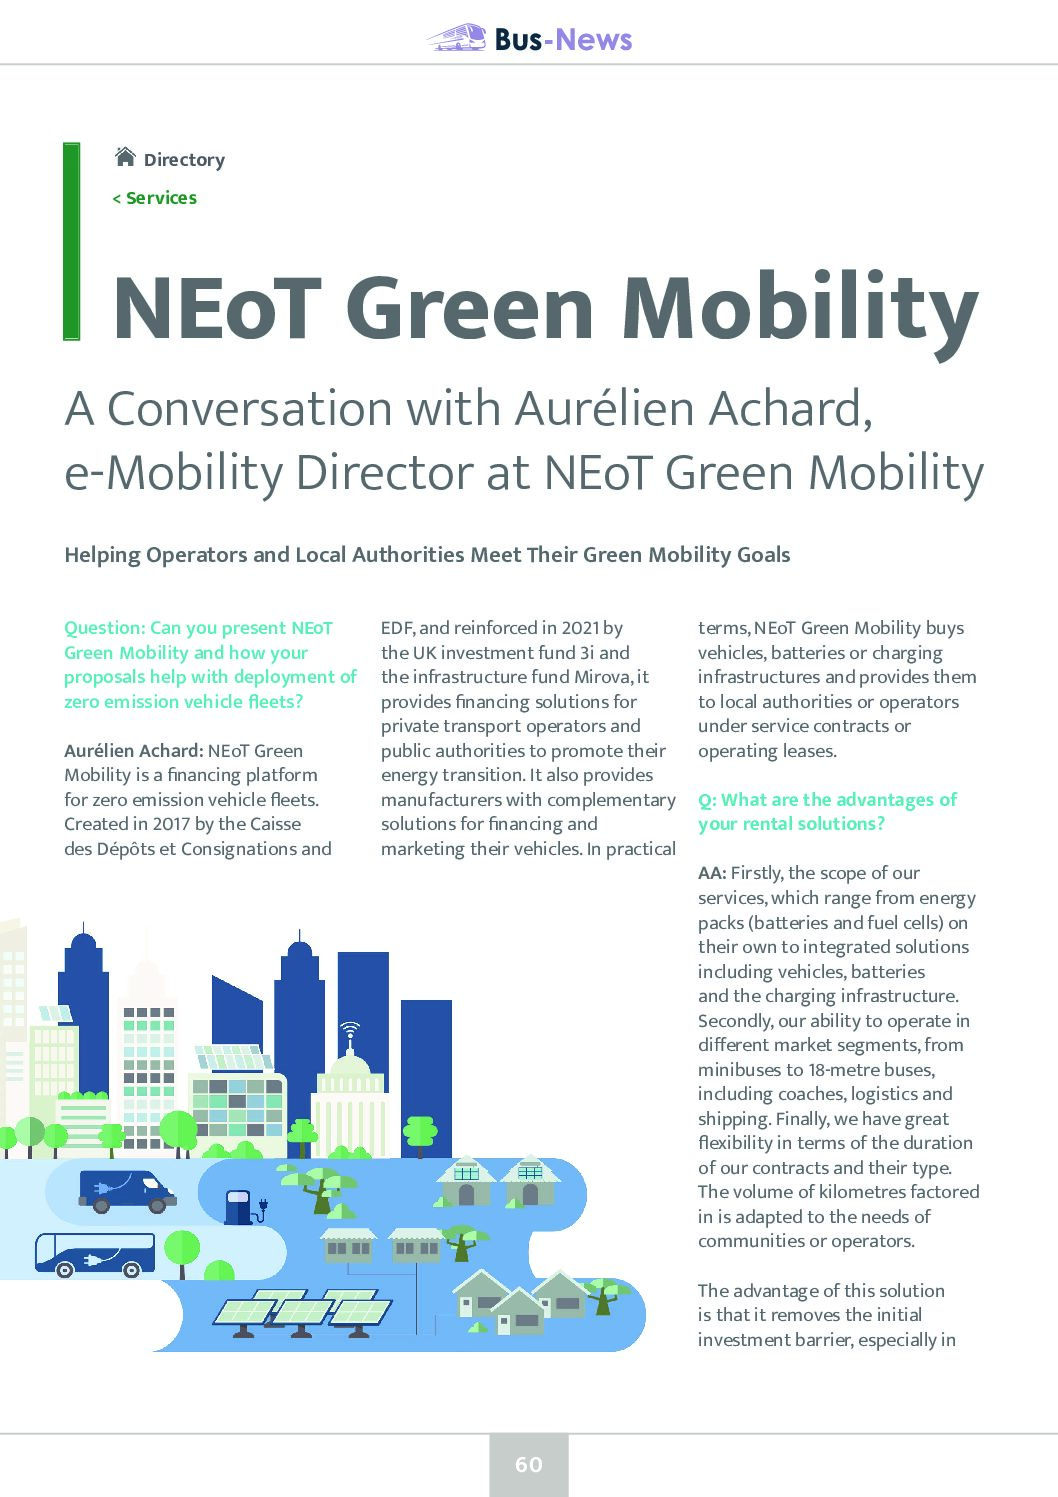 A Conversation with Aurélien Achard, e-Mobility Director at NEoT Green Mobility